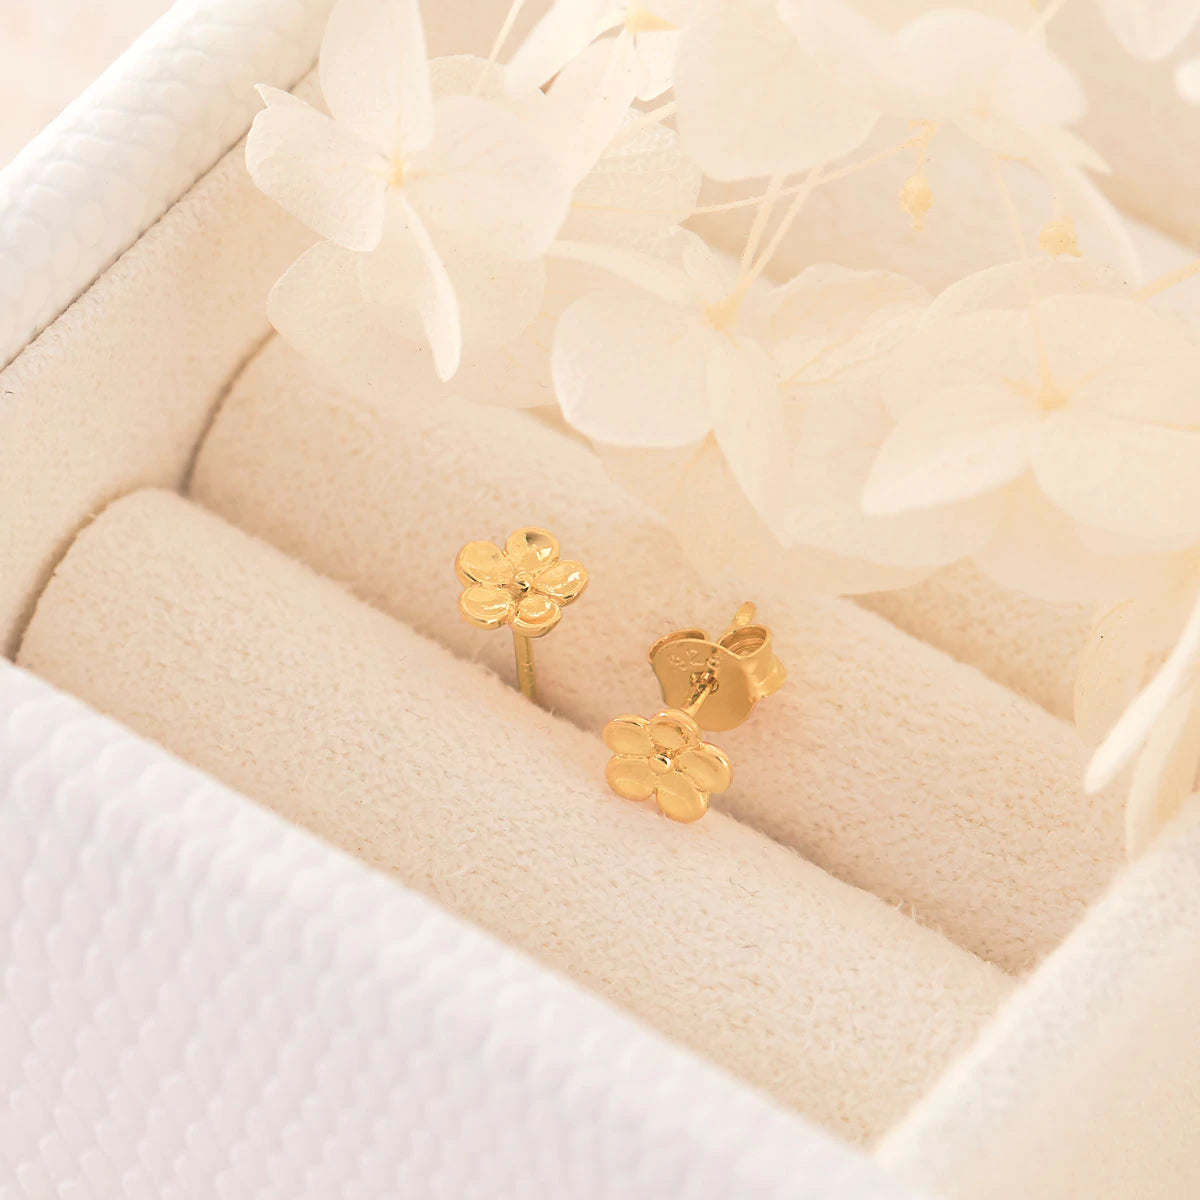 S515G - Forget Me Not Studs Gold